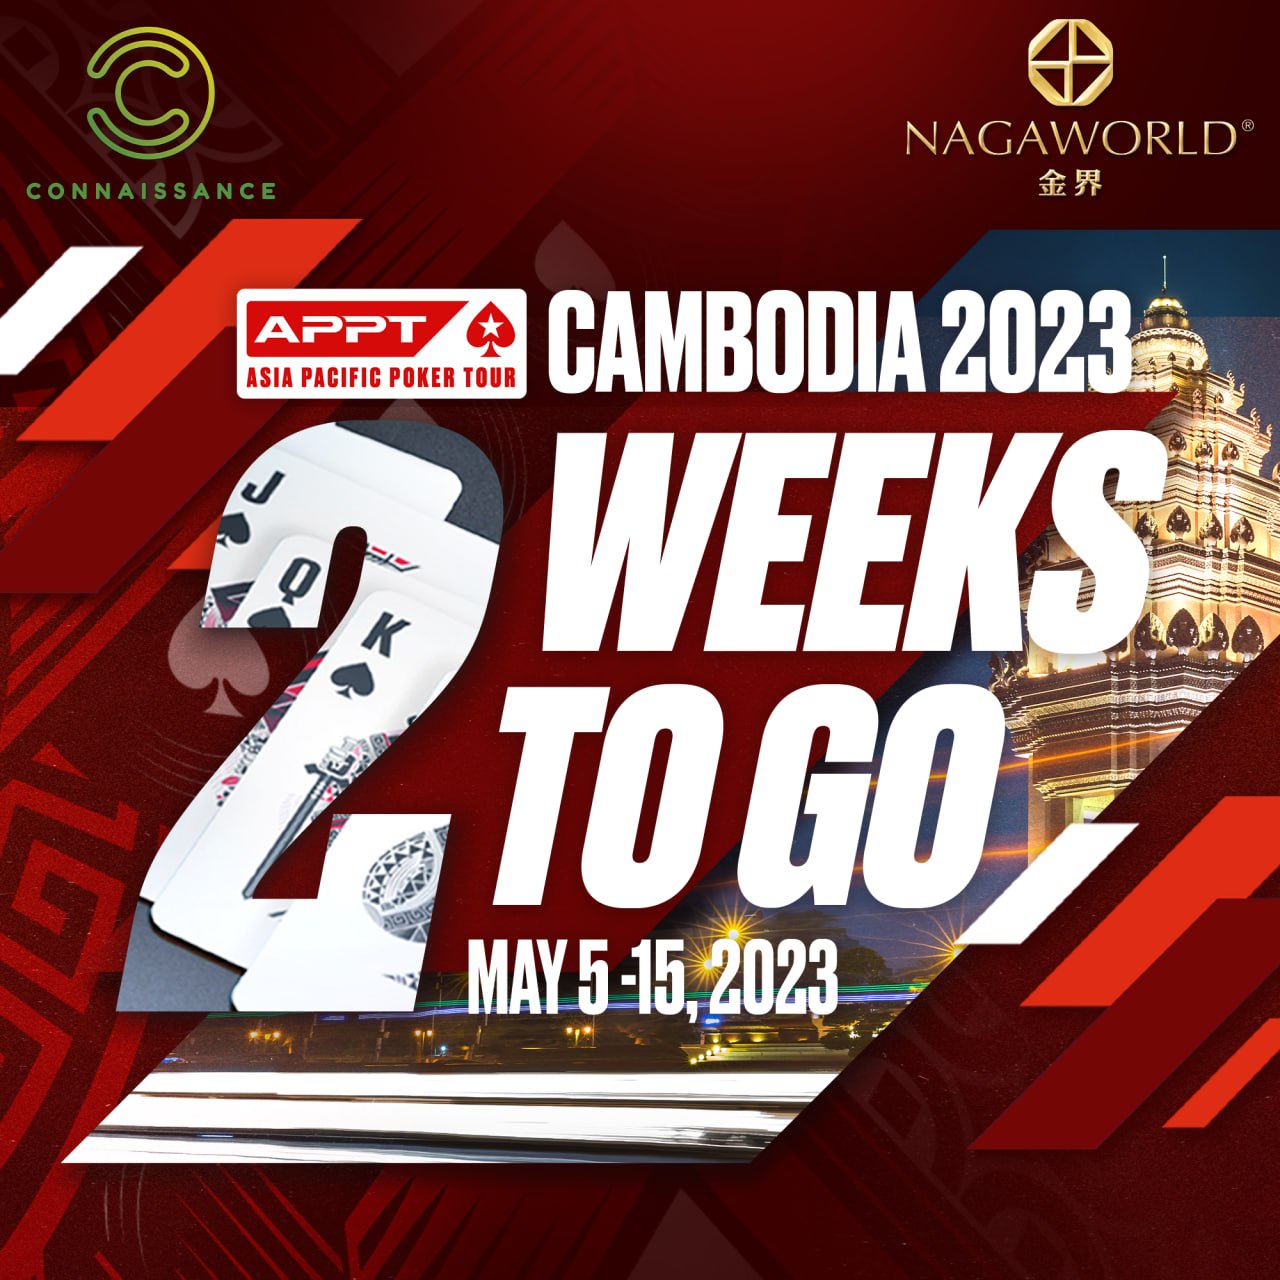 Two weeks away from the Asia Pacific Poker Tour's return to the Kingdom of Wonder - NagaWorld Phnom Penh - May 5 to 15 